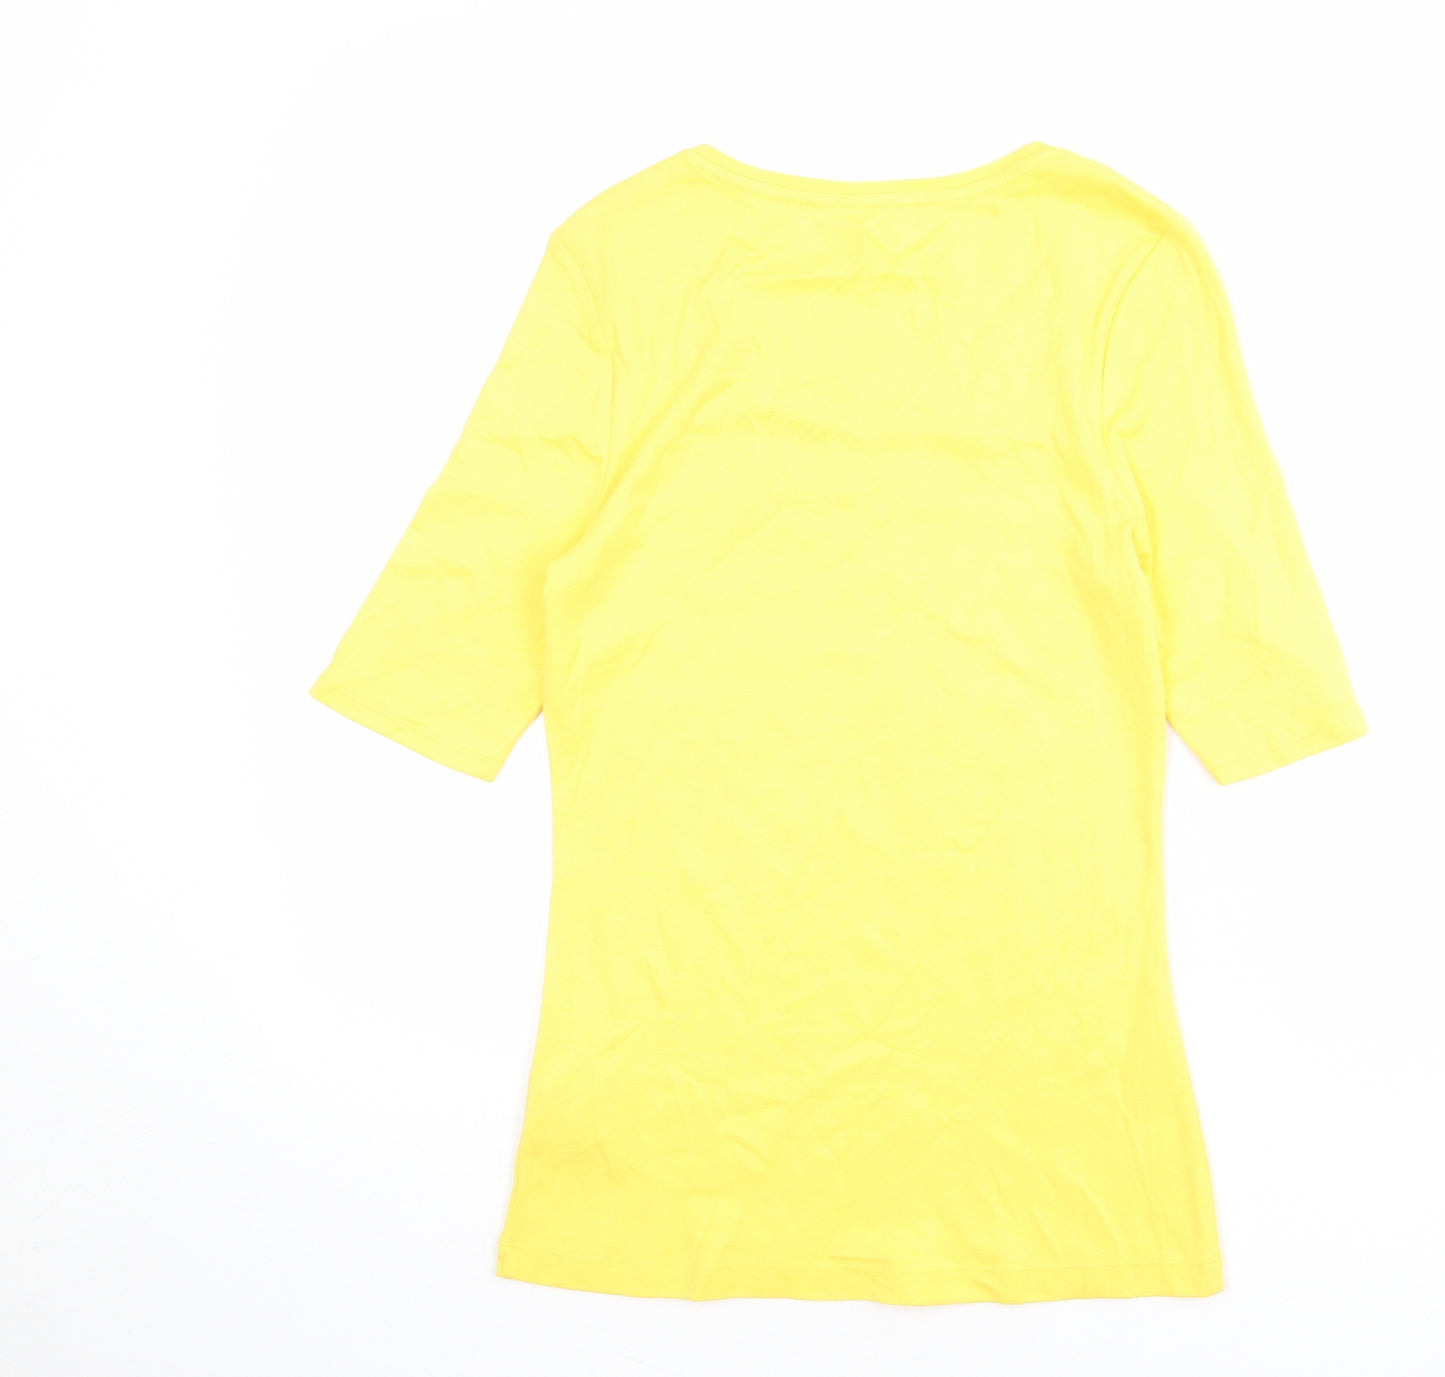 Marks and Spencer Womens Yellow 100% Cotton Basic T-Shirt Size 12 Scoop Neck